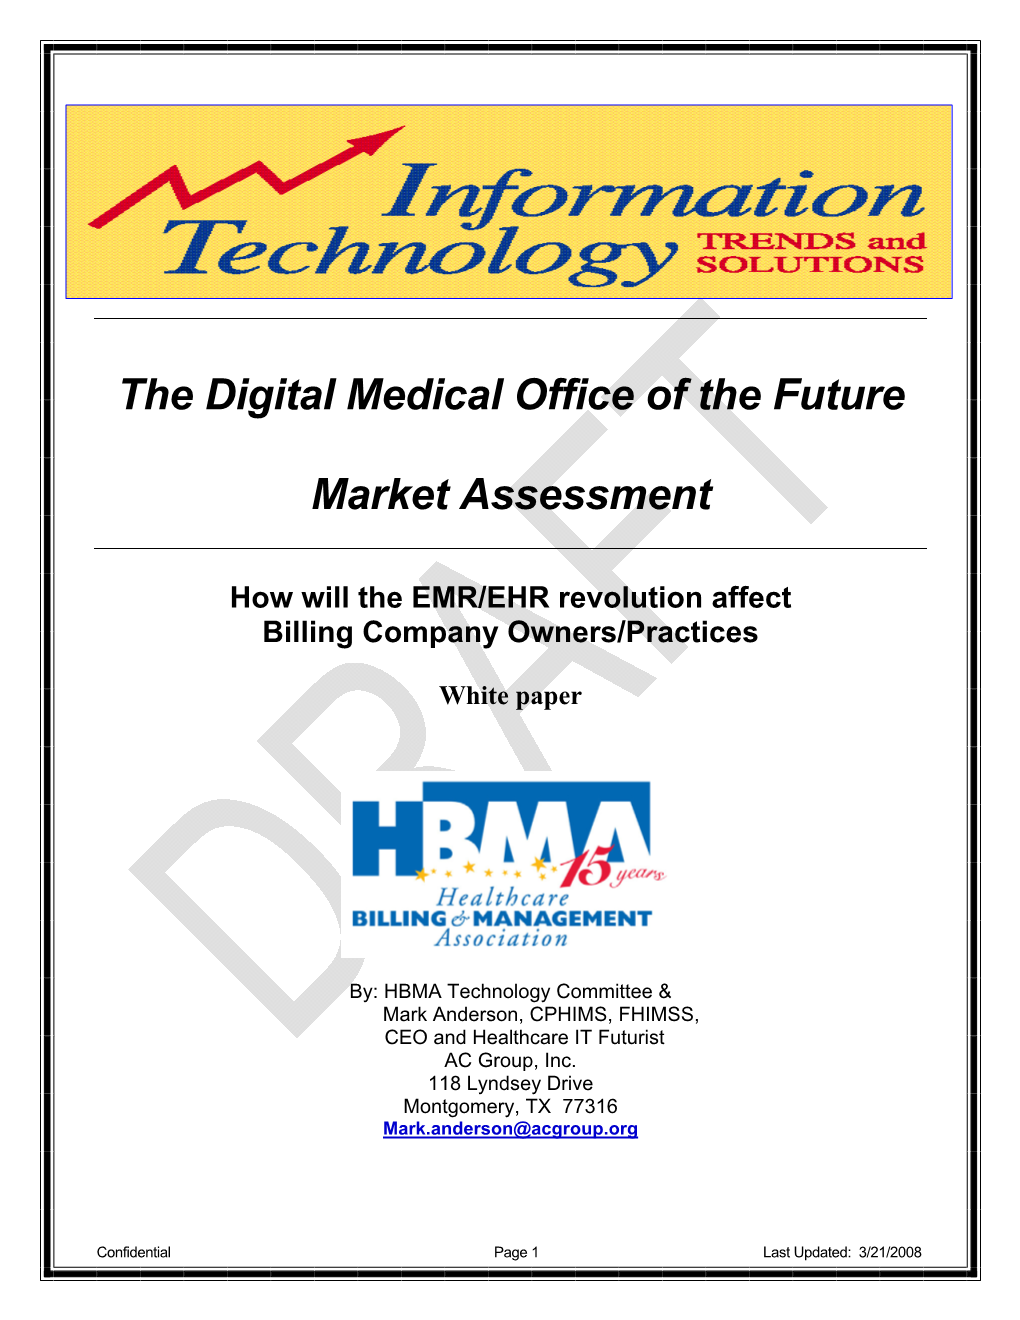 The Digital Medical Office of the Future Market Assessment